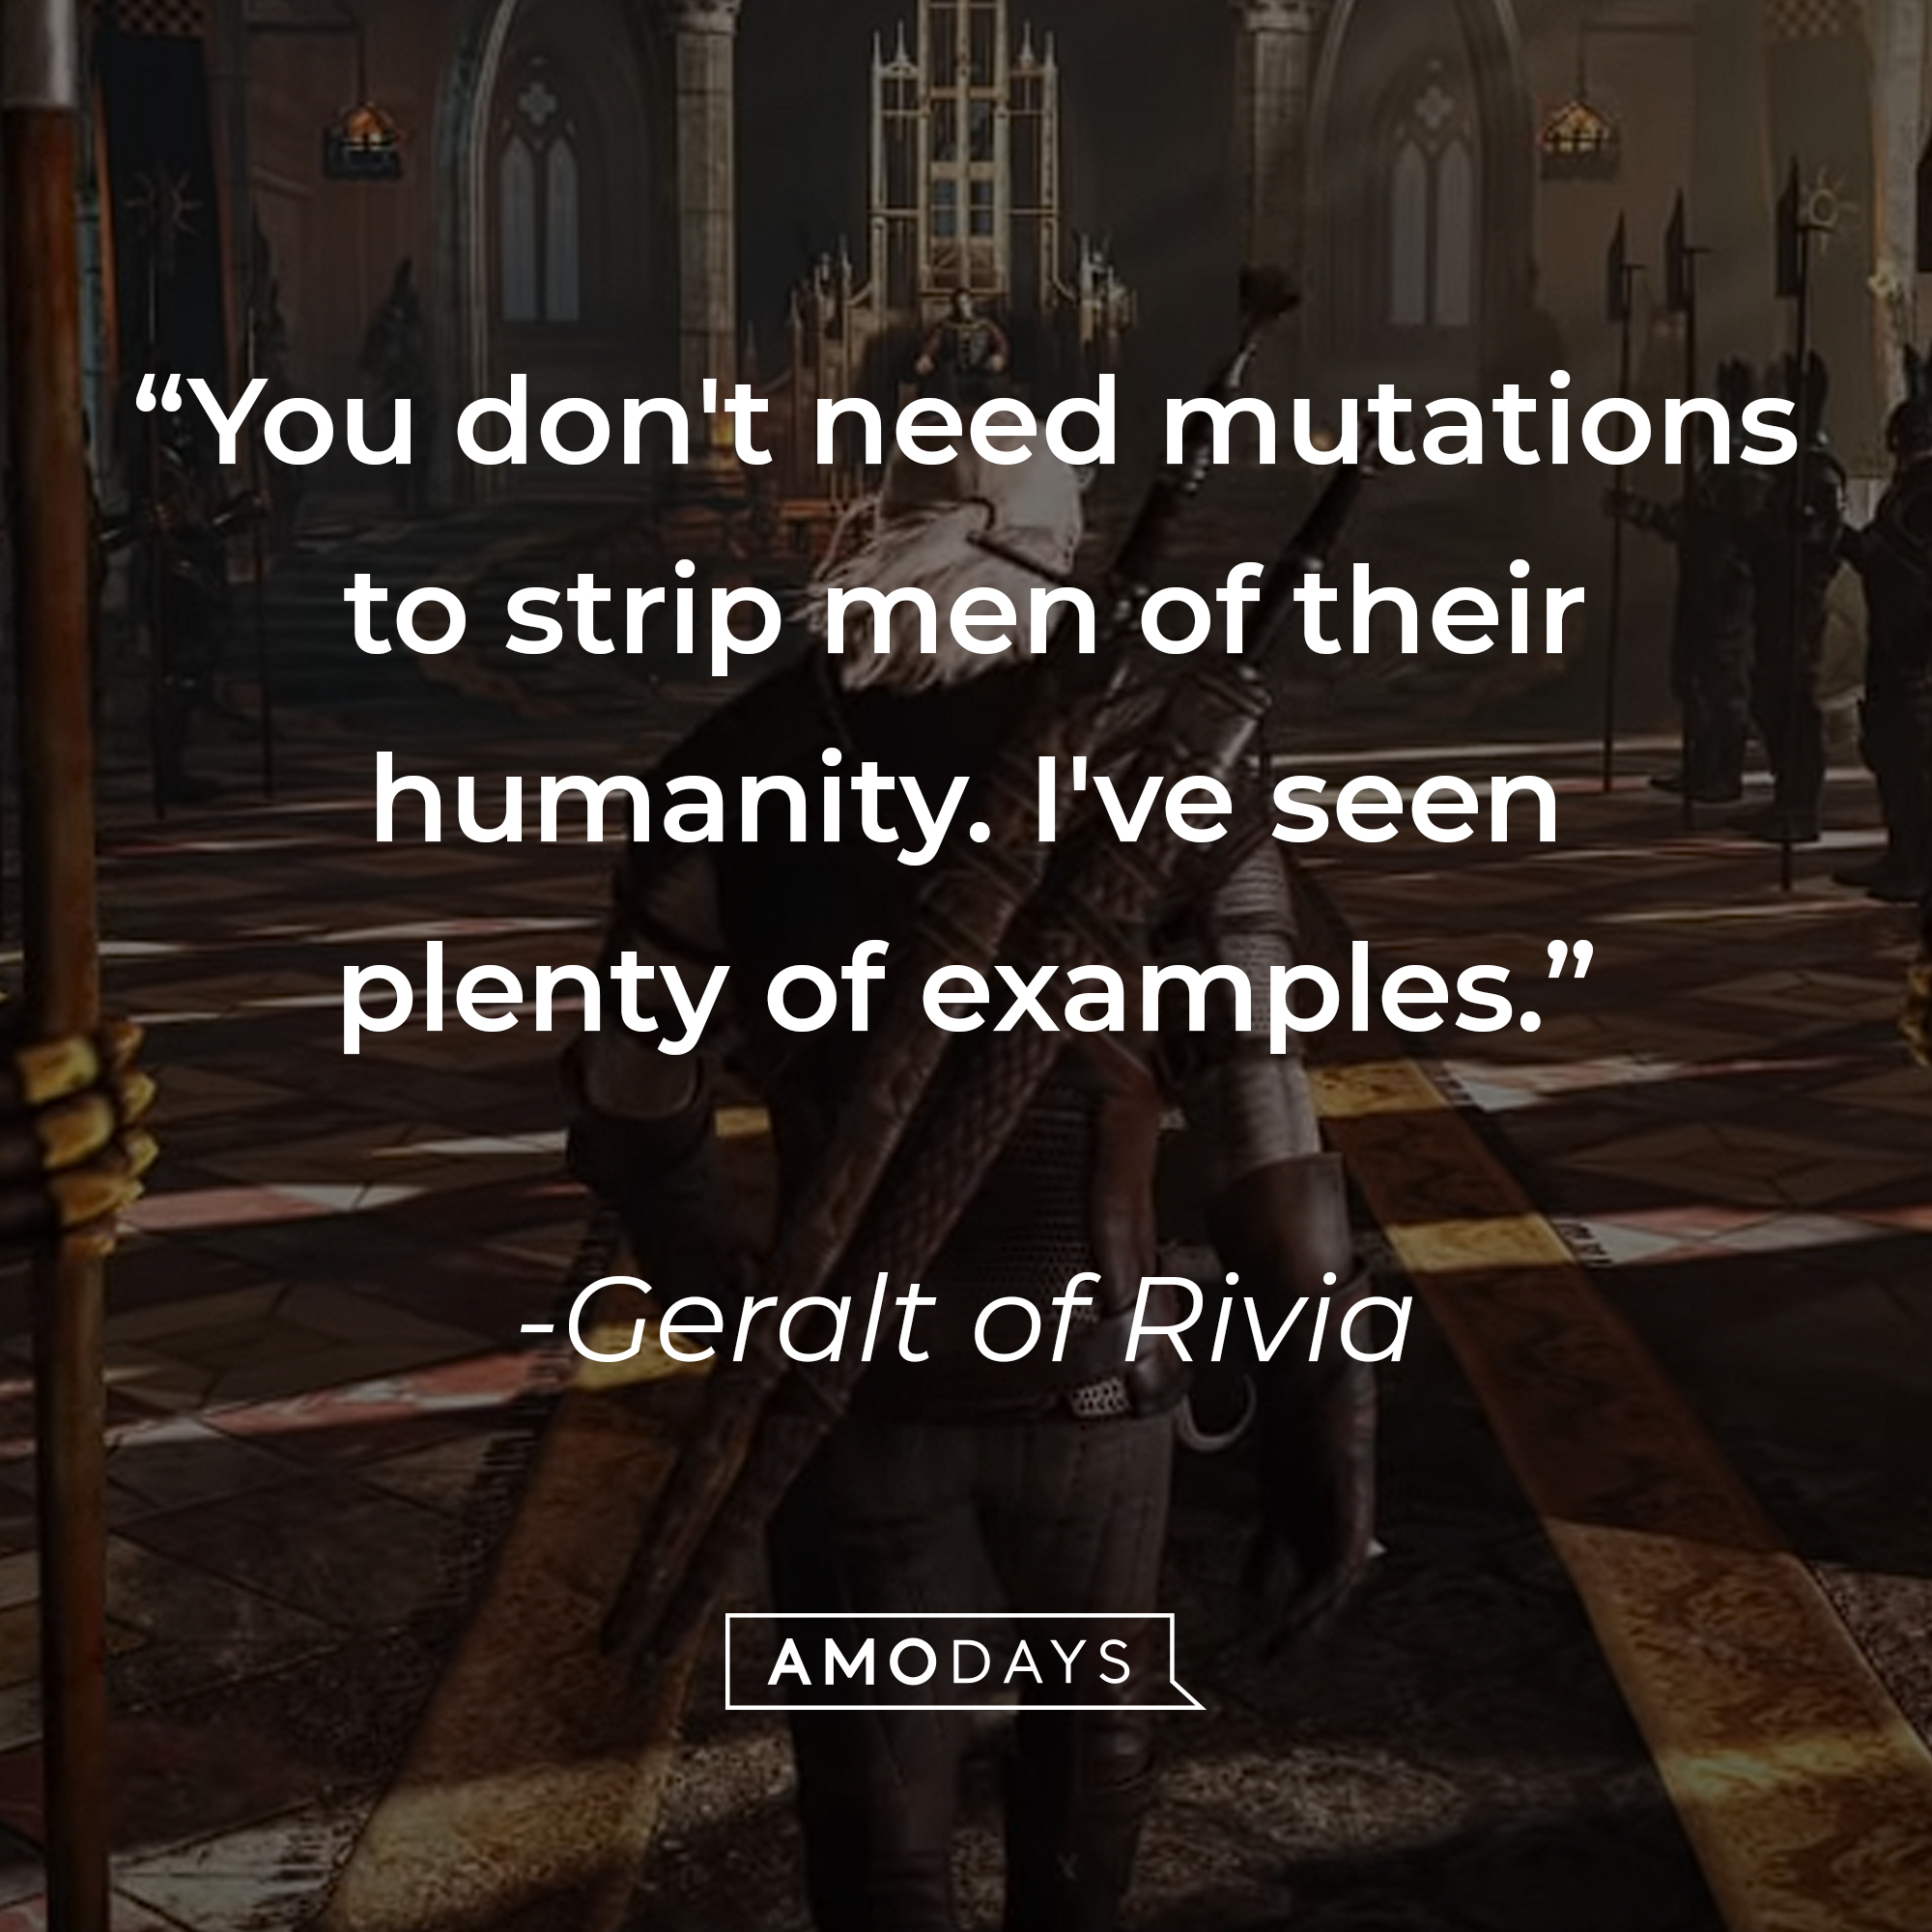 Geralt of Rivia's quote: "You don't need mutations to strip men of their humanity. I've seen plenty of examples."  | Source: youtube.com/CDPRED